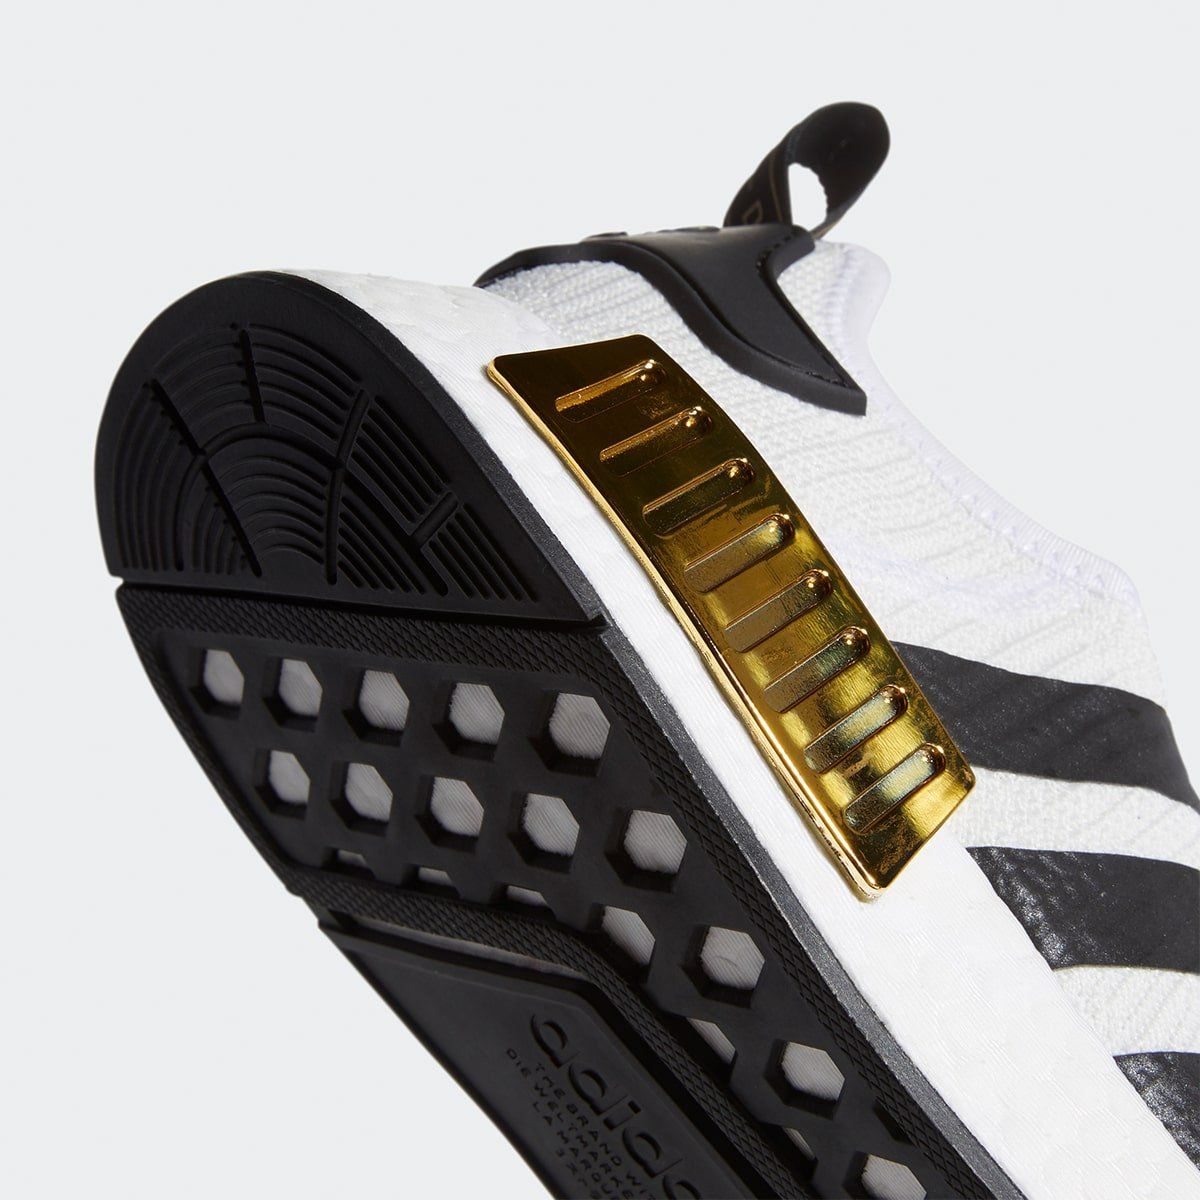 Available Now // Metallic Gold adidas NMD R1 | HOUSE HEAT